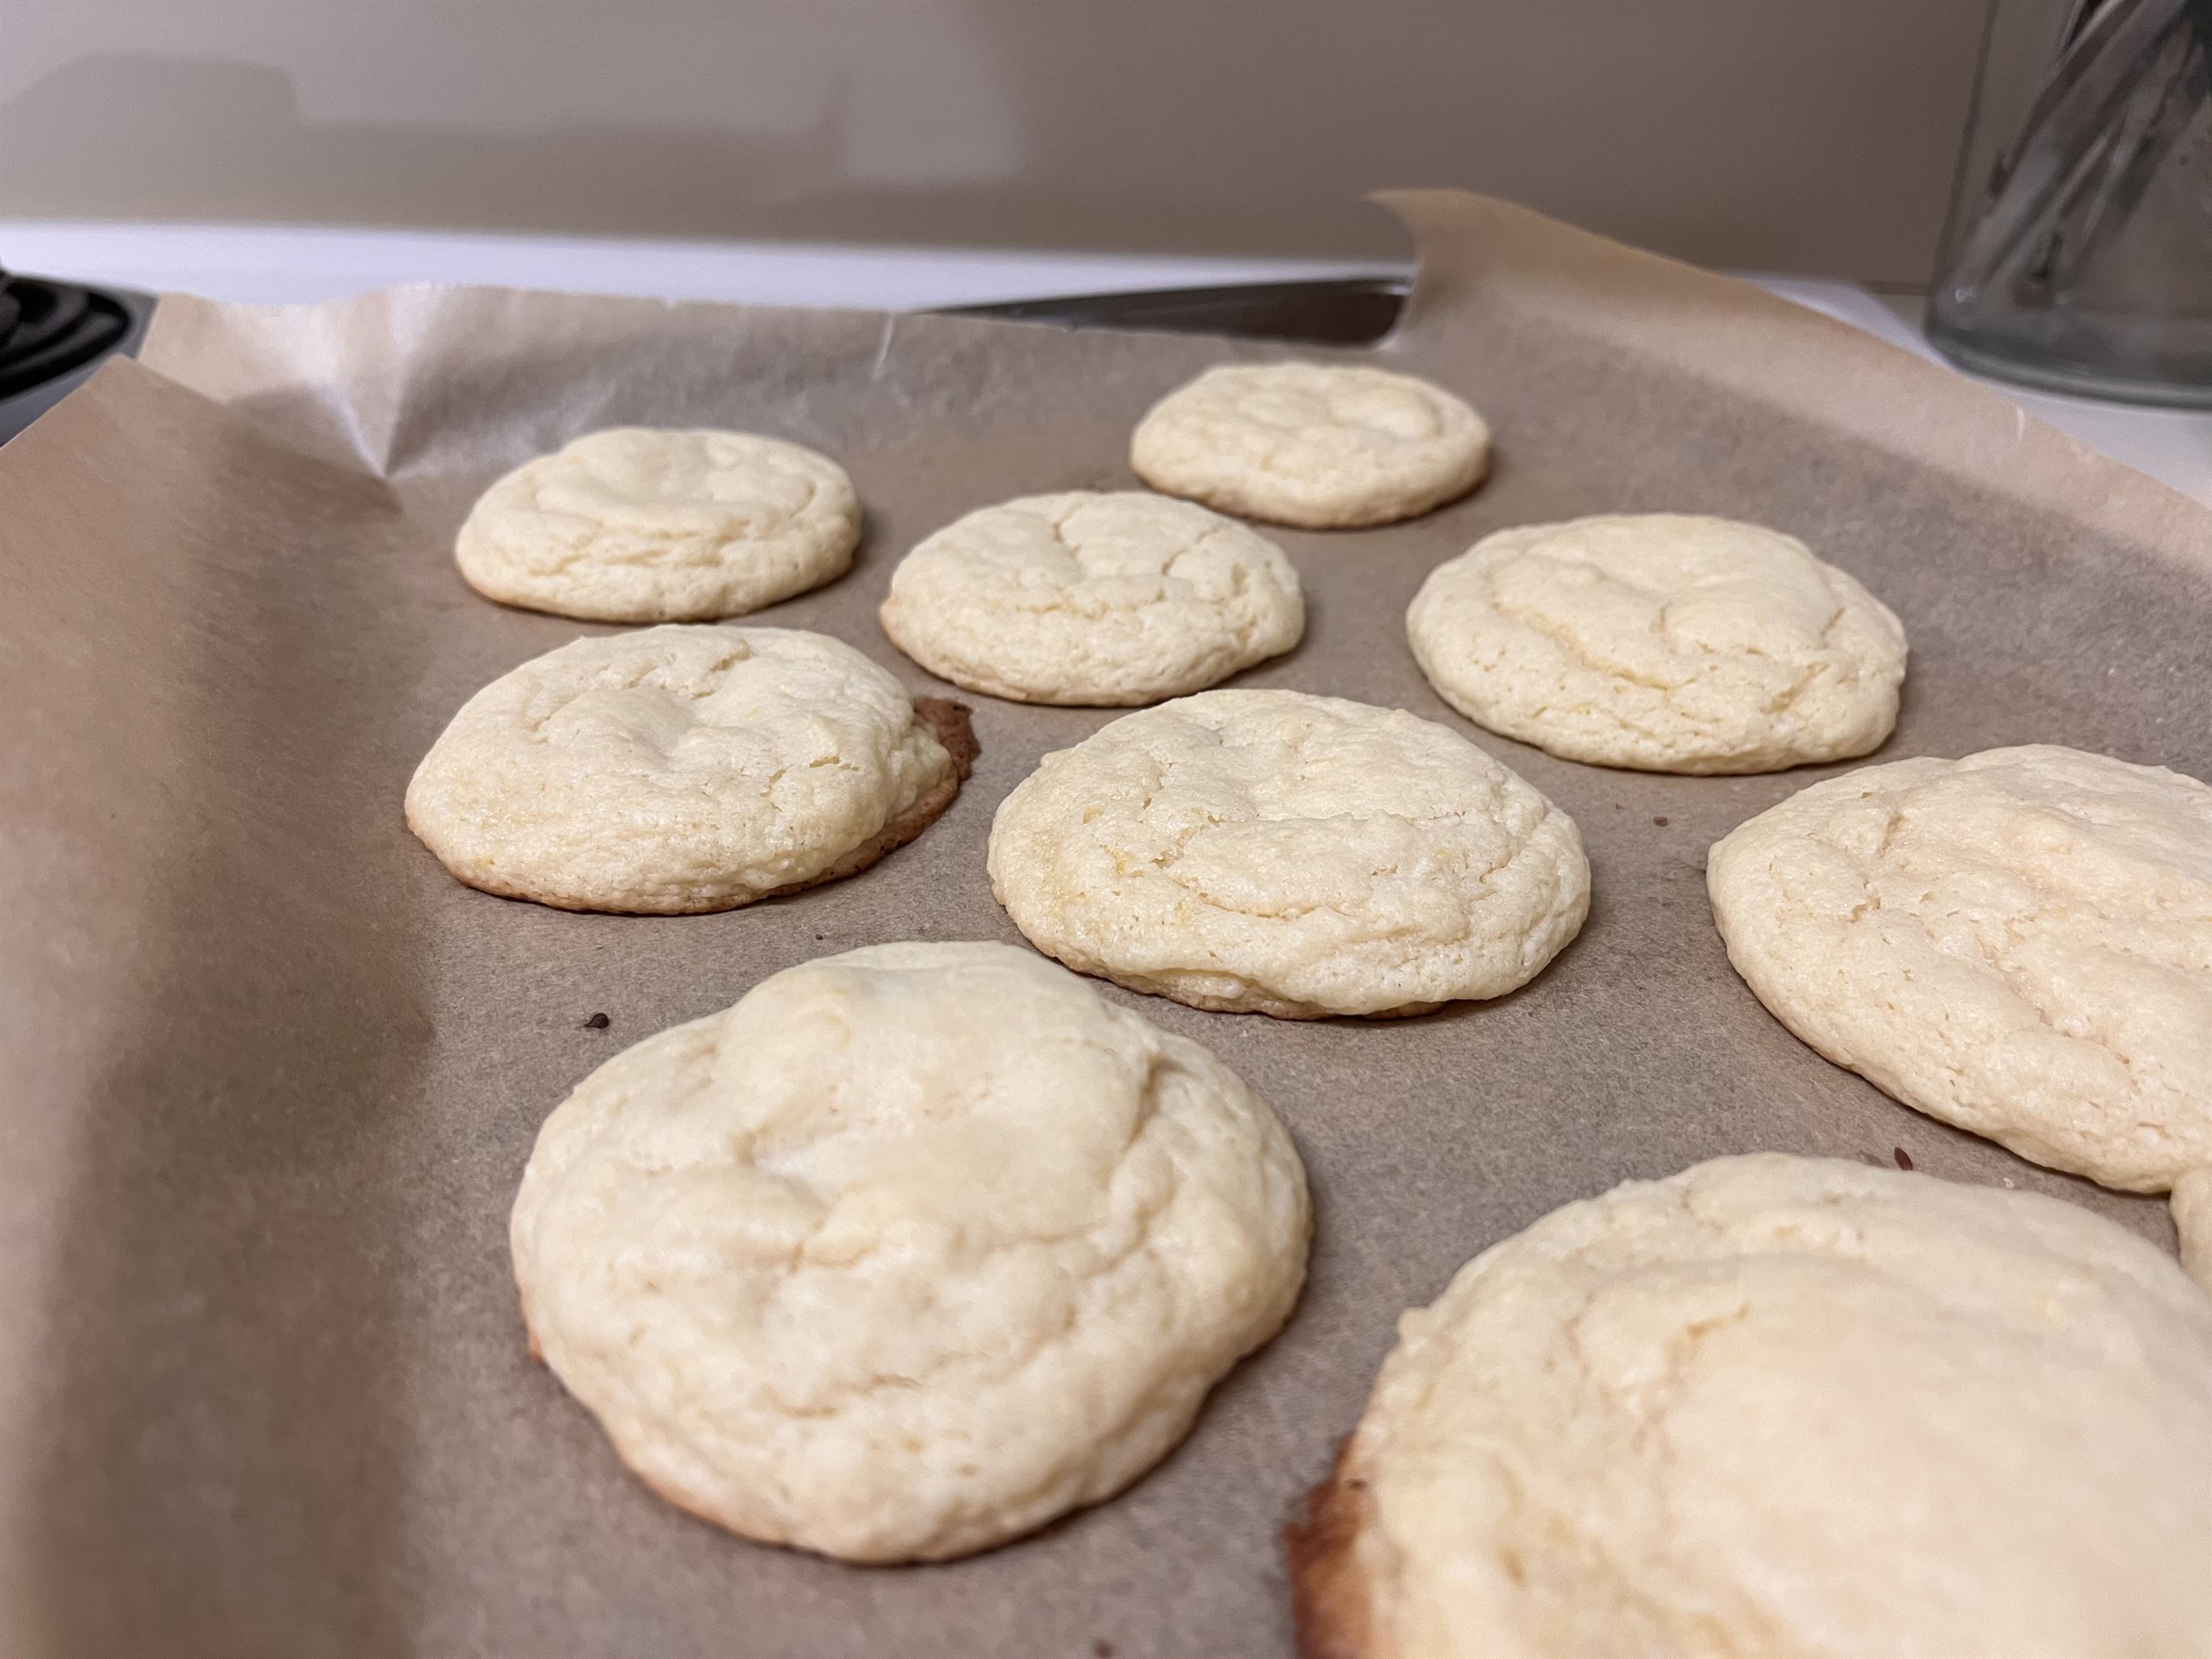 Put the icing on the cookies after they have rested for about 15 minutes.
Hannah Effinger | The Montclarion